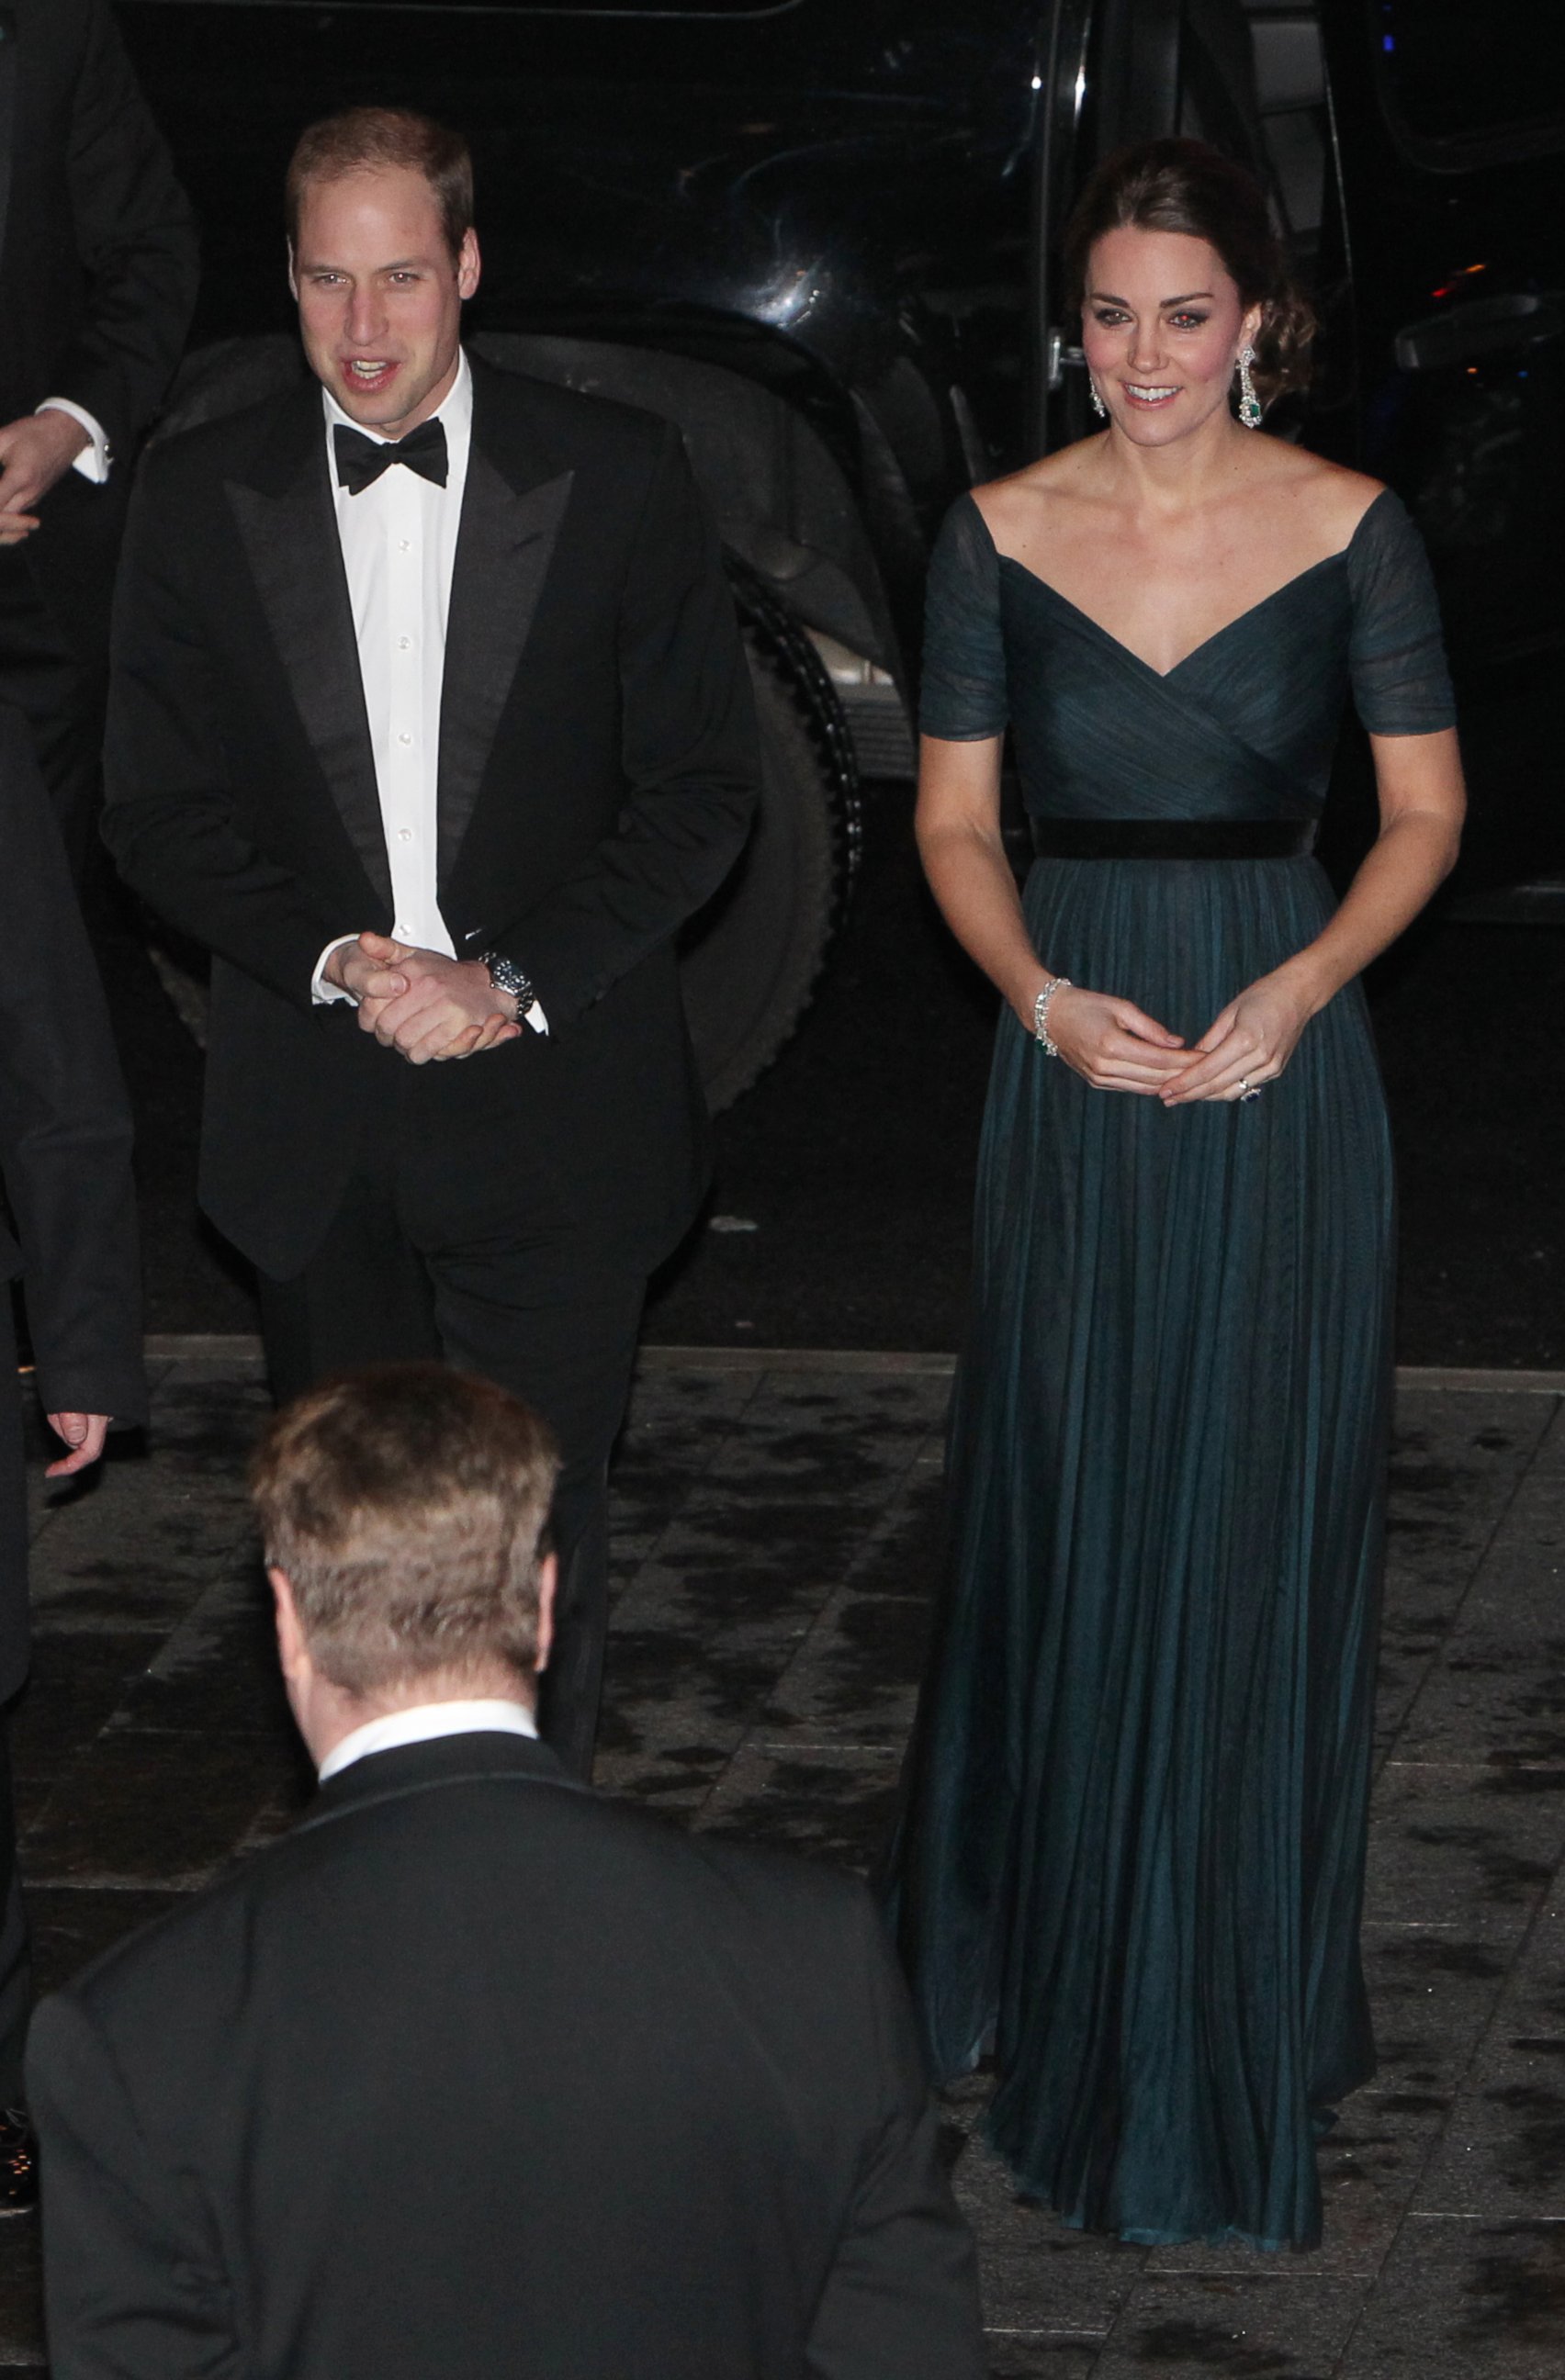 PHOTO: Prince William, Duke of Cambridge and Catherine, Duchess of Cambridge arrive at Metropolitan Museum of Art to attend the St. Andrews 600th Anniversary Dinner, Dec. 9, 2014 in New York City. 